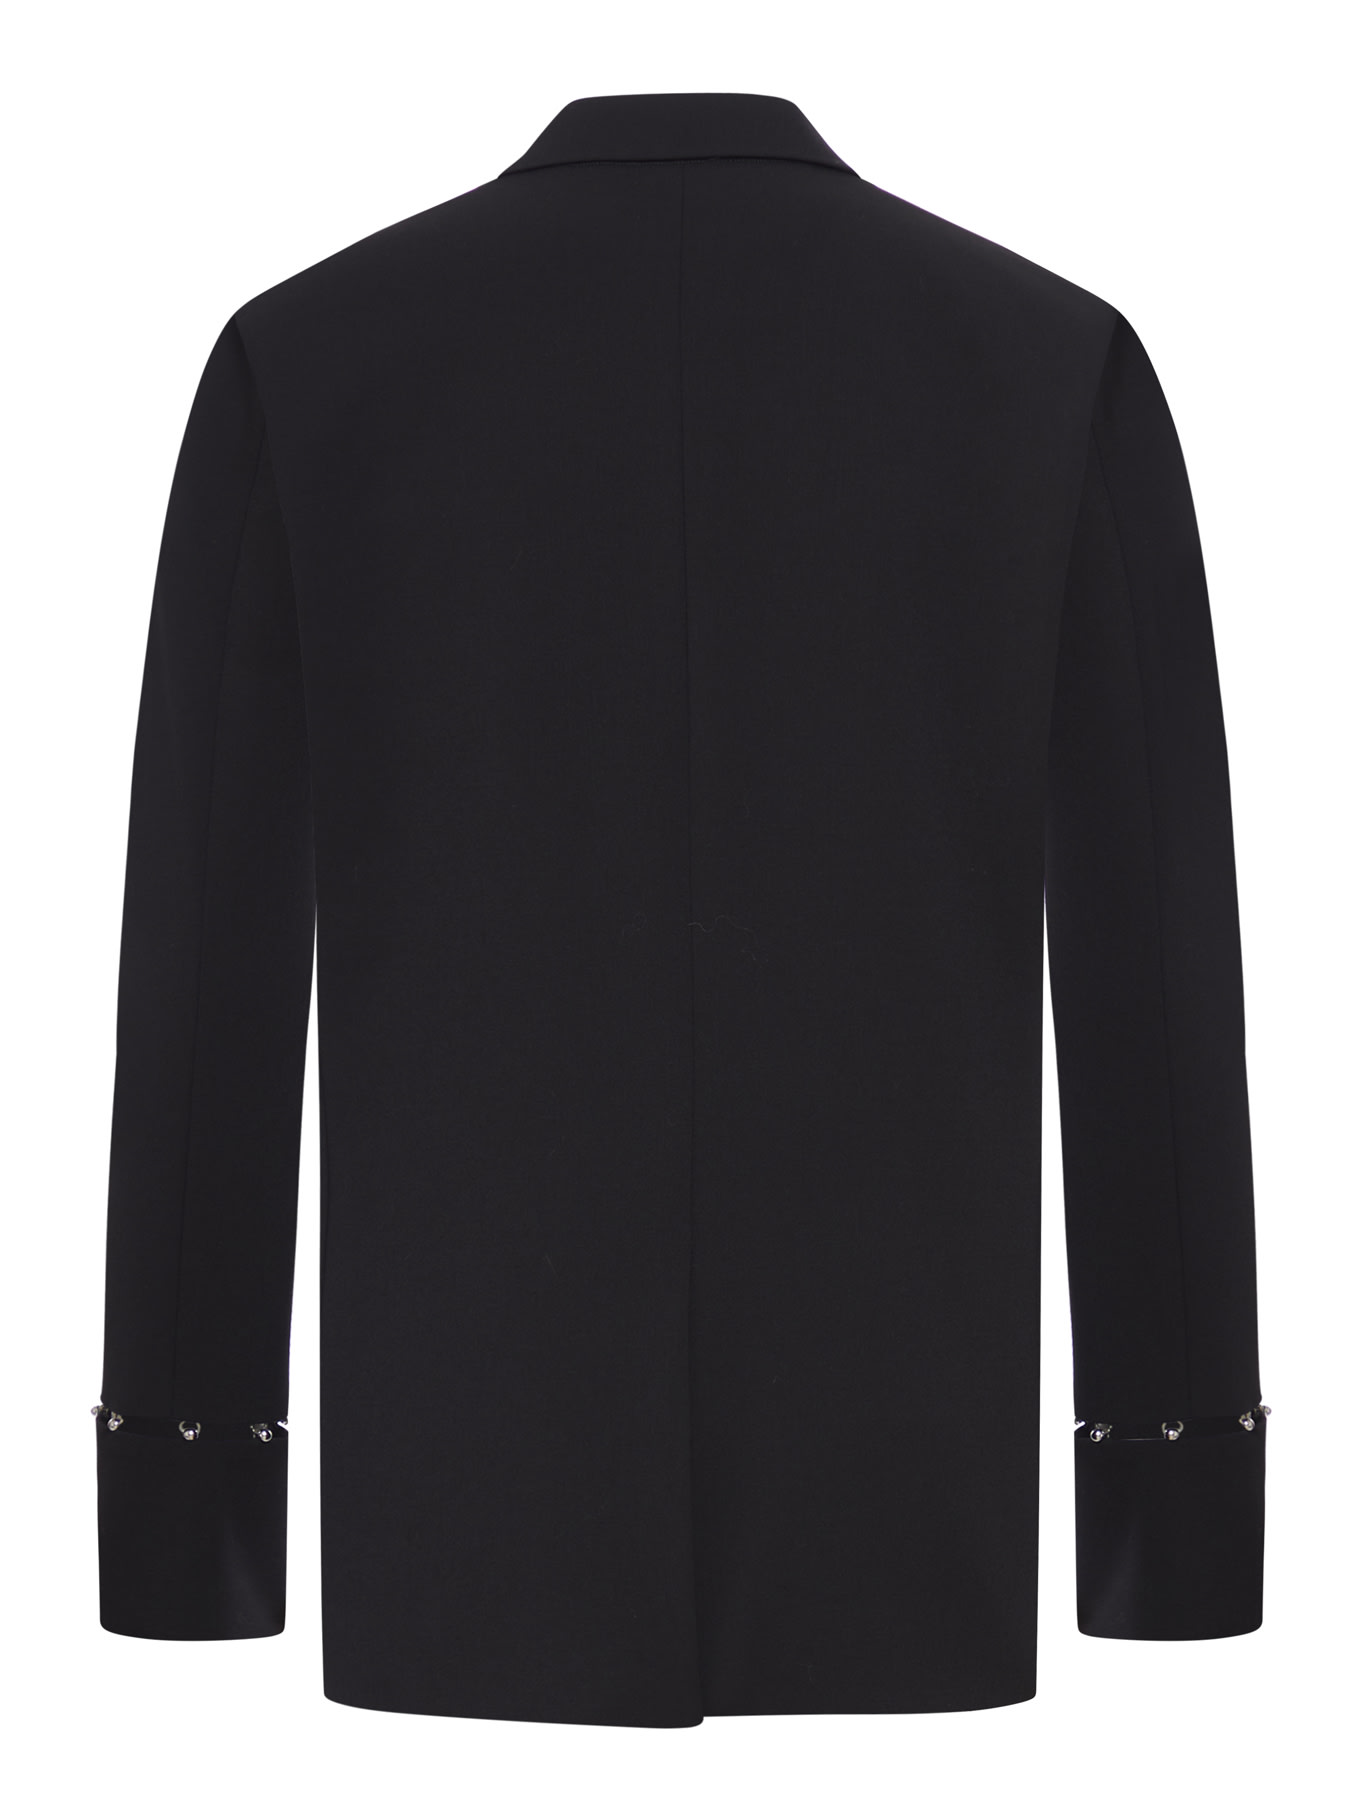 Shop Del Core Single Breasted Tailored Jacket With Mushroom Hook Detail On Sleeves In Black